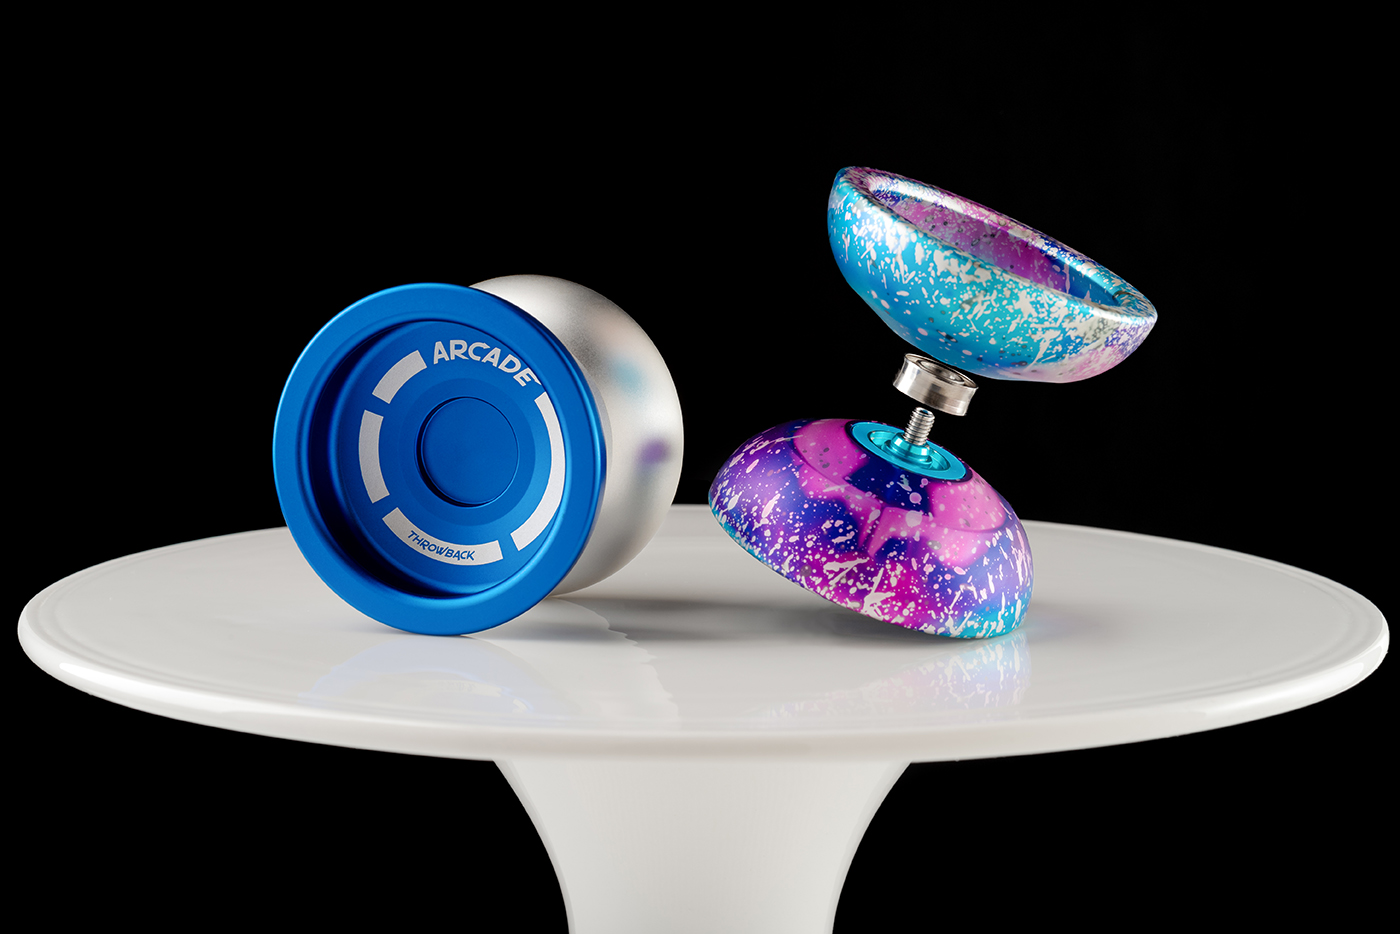 Shop for yoyos and accessories